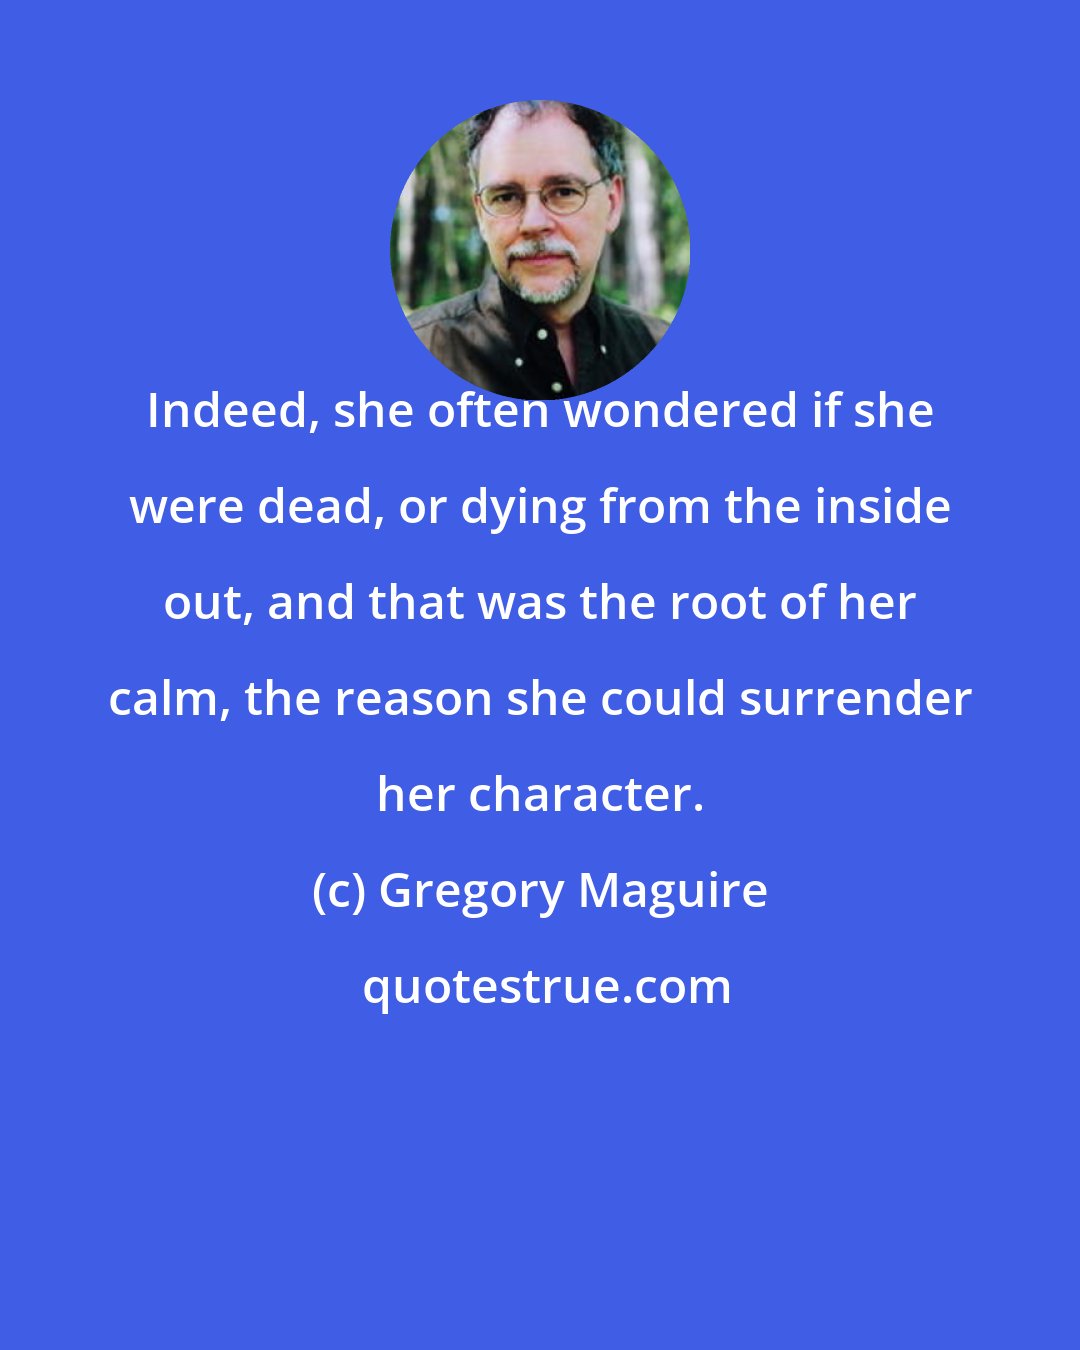 Gregory Maguire: Indeed, she often wondered if she were dead, or dying from the inside out, and that was the root of her calm, the reason she could surrender her character.